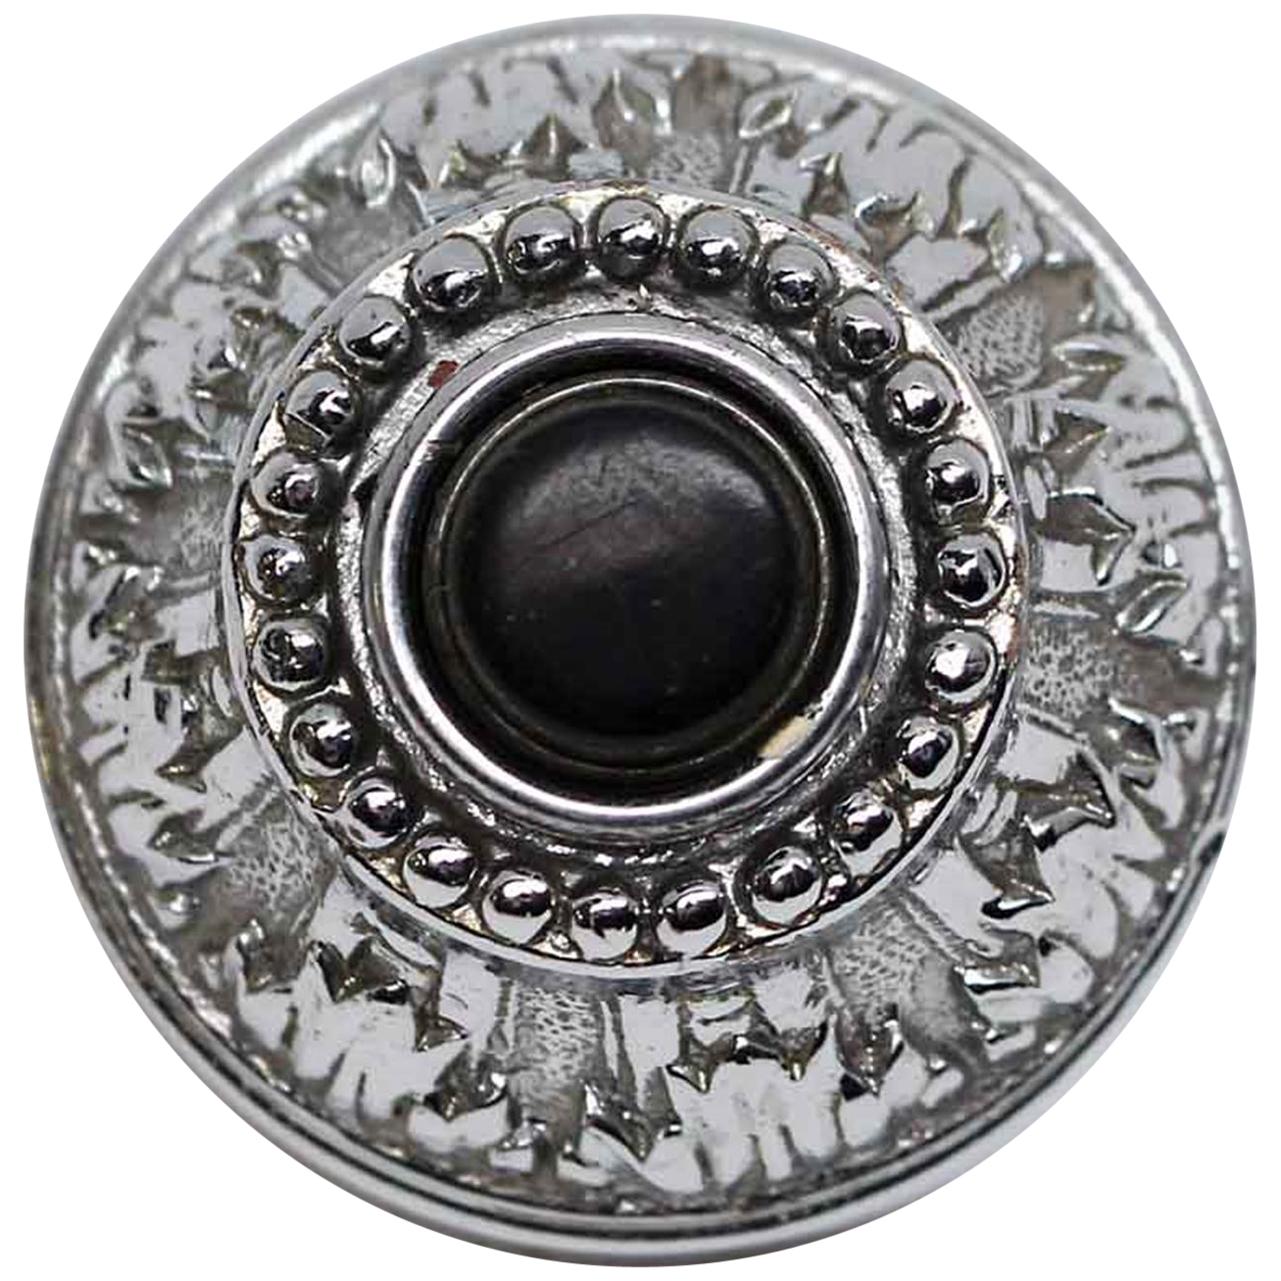 Nickel Plated NYC Waldorf Astoria Hotel Ornate Doorbell with Black Button